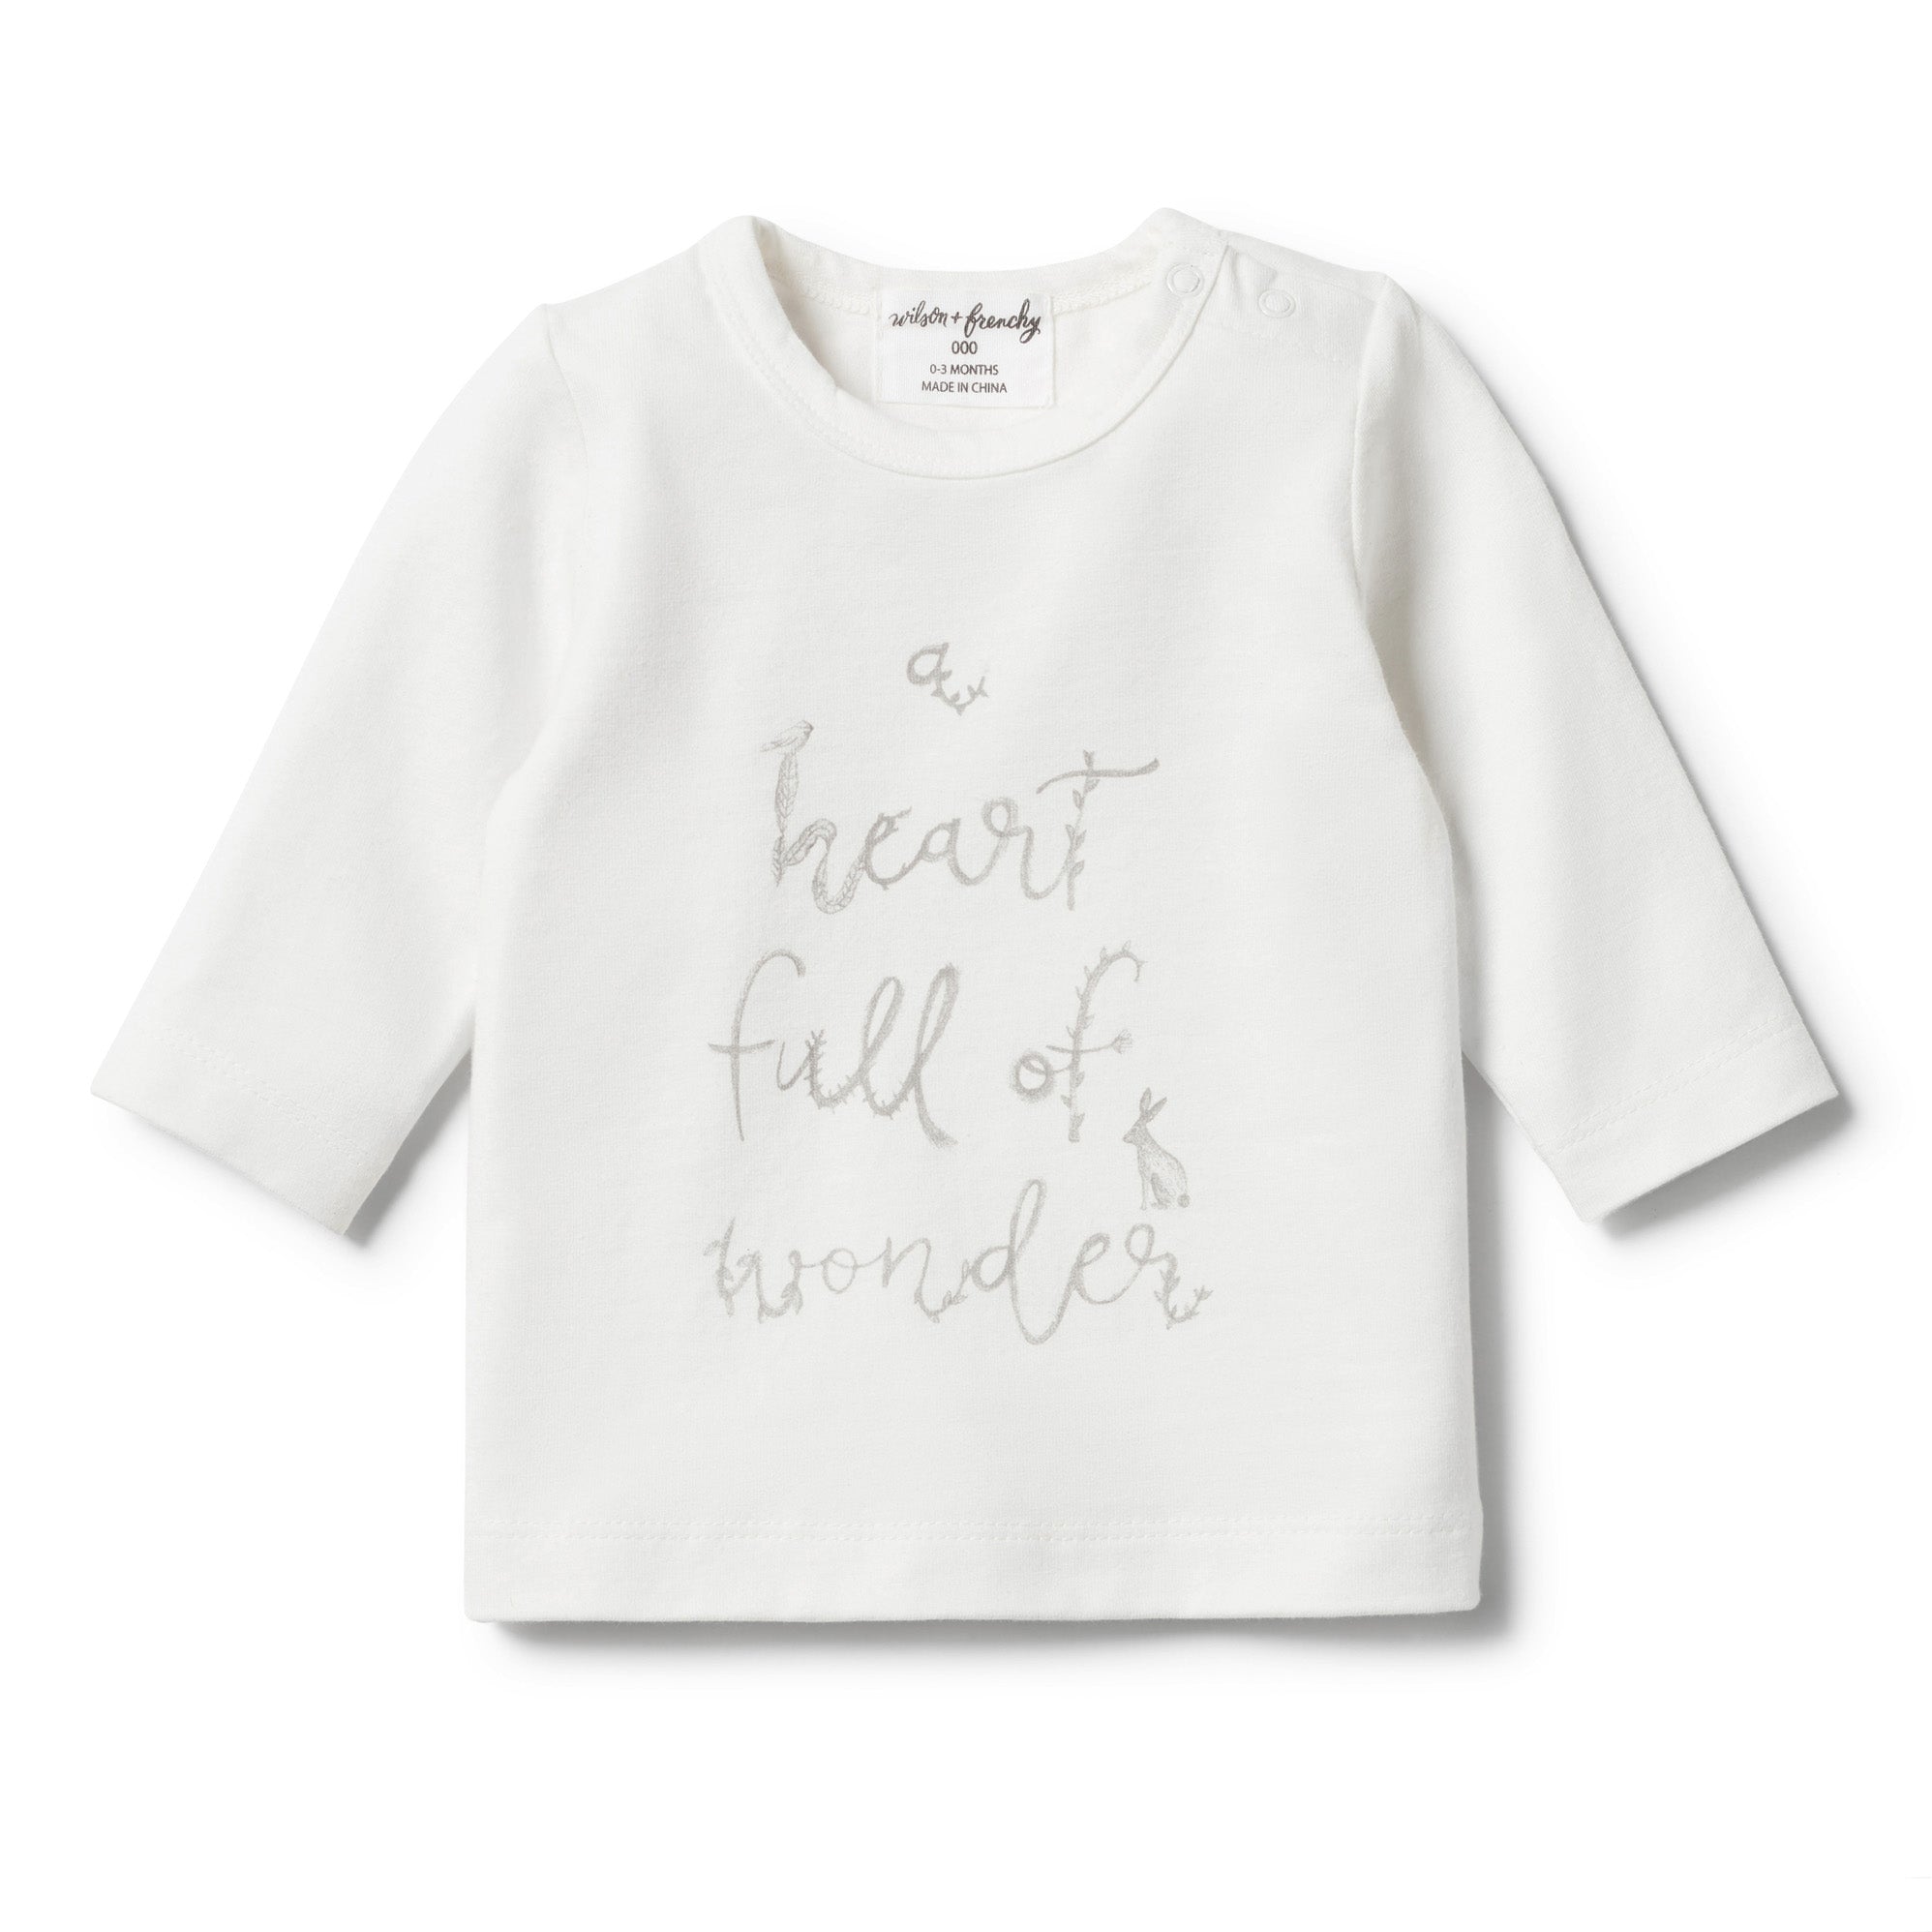 ORGANIC HEART FULL OF WONDER LONG SLEEVE TOP - Wilson and Frenchy